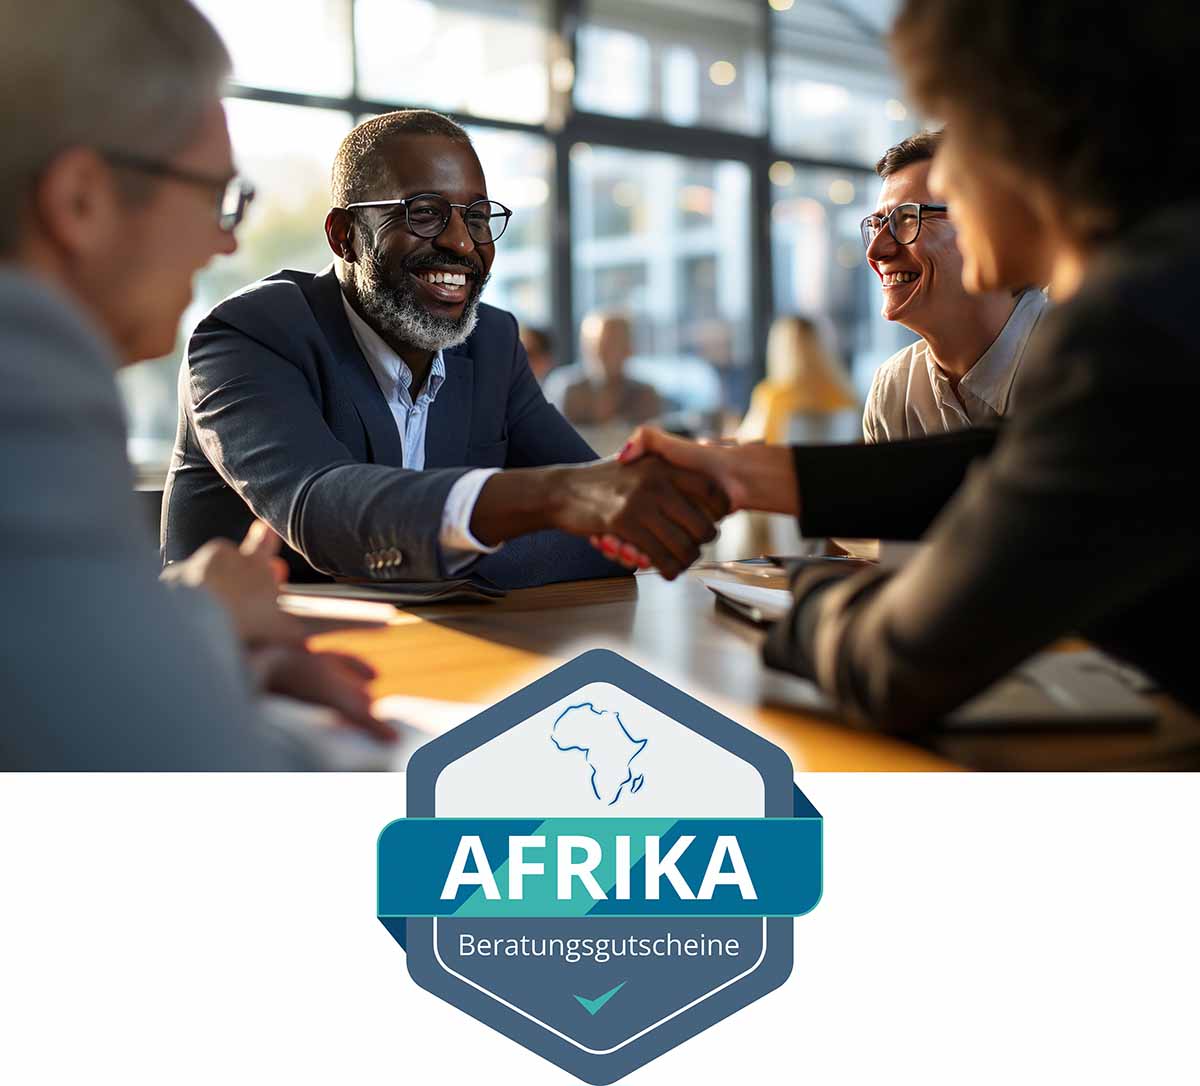 move technology now official provider for BAFA/BMWK consulting vouchers for Africa – customers benefit from 85% funding